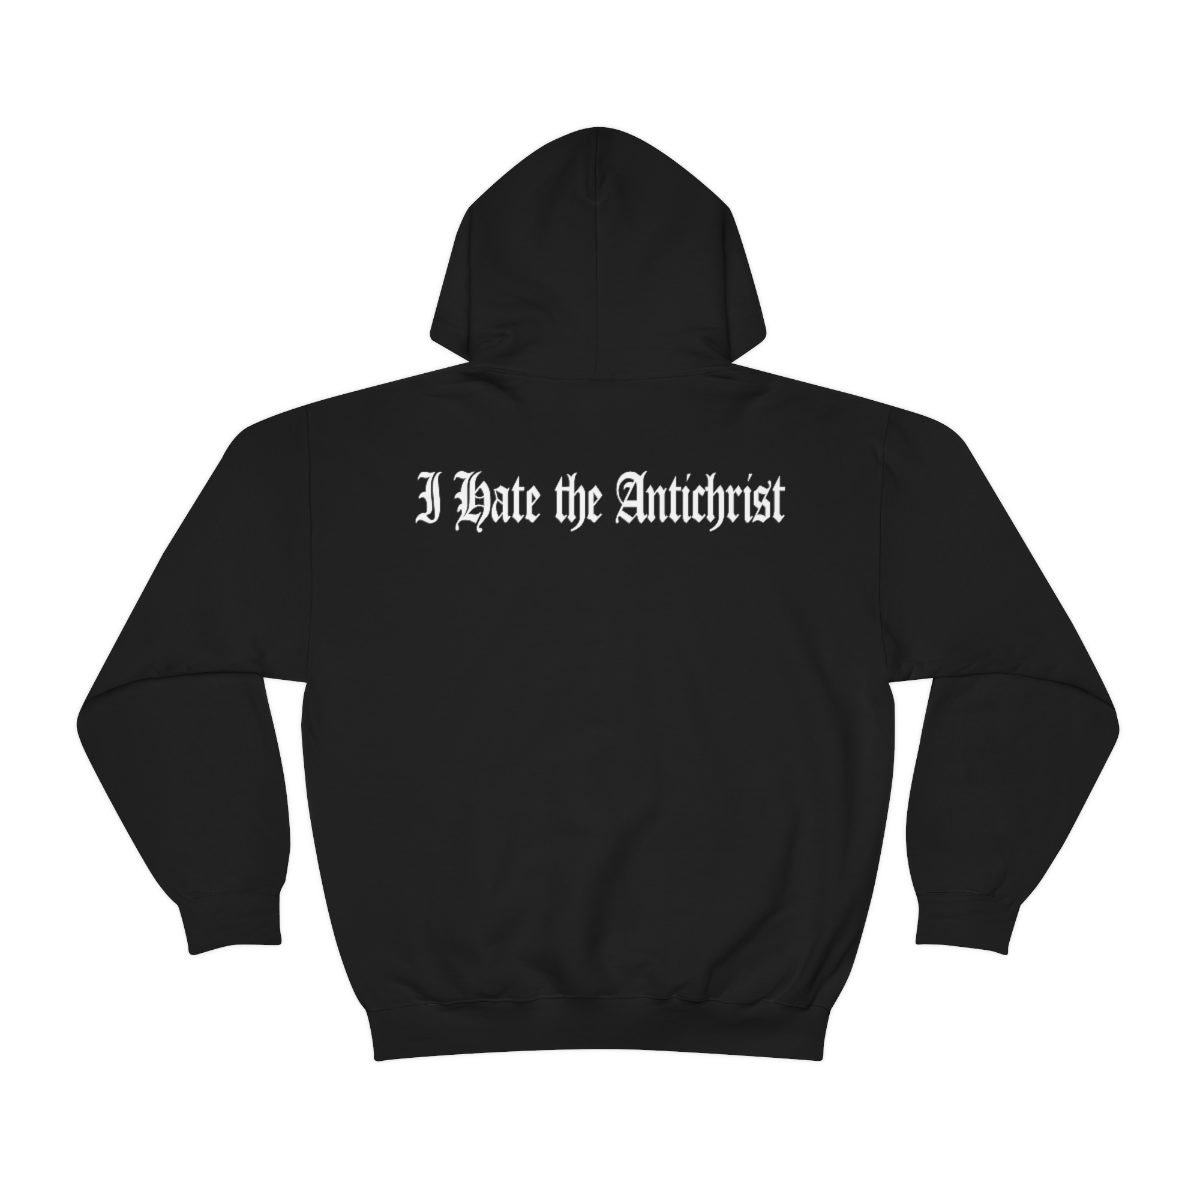 Via Crucis – Cast Out from the Holy Tomb Pullover Hooded Sweatshirt